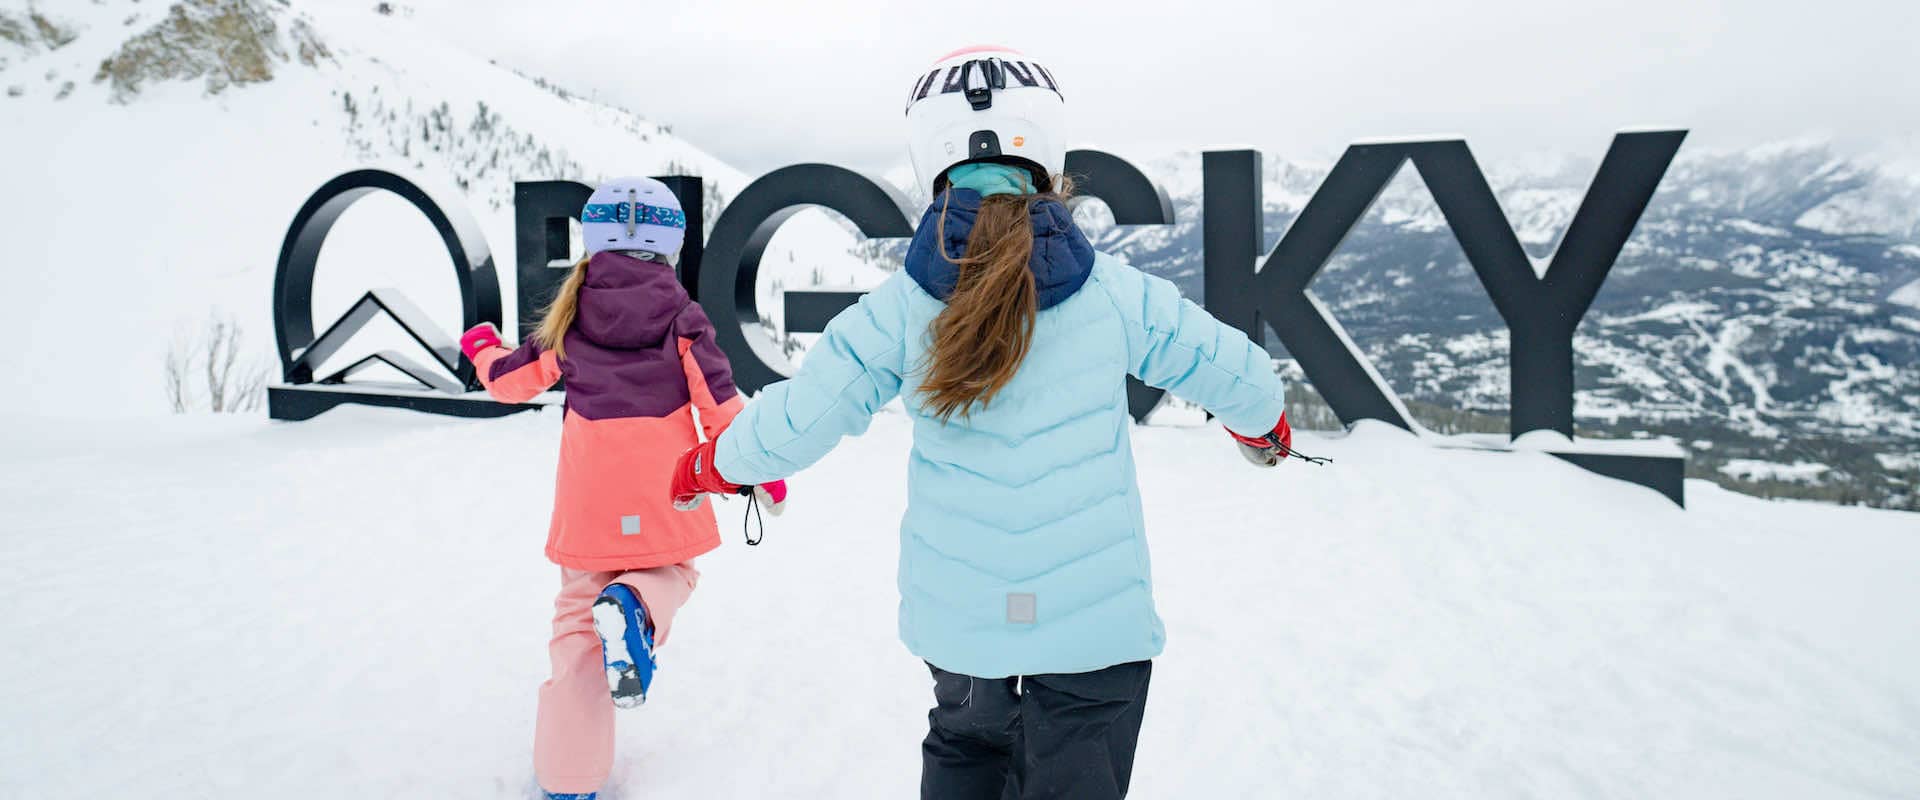 Two girls in ski gear running towards a sign that says Big Sky